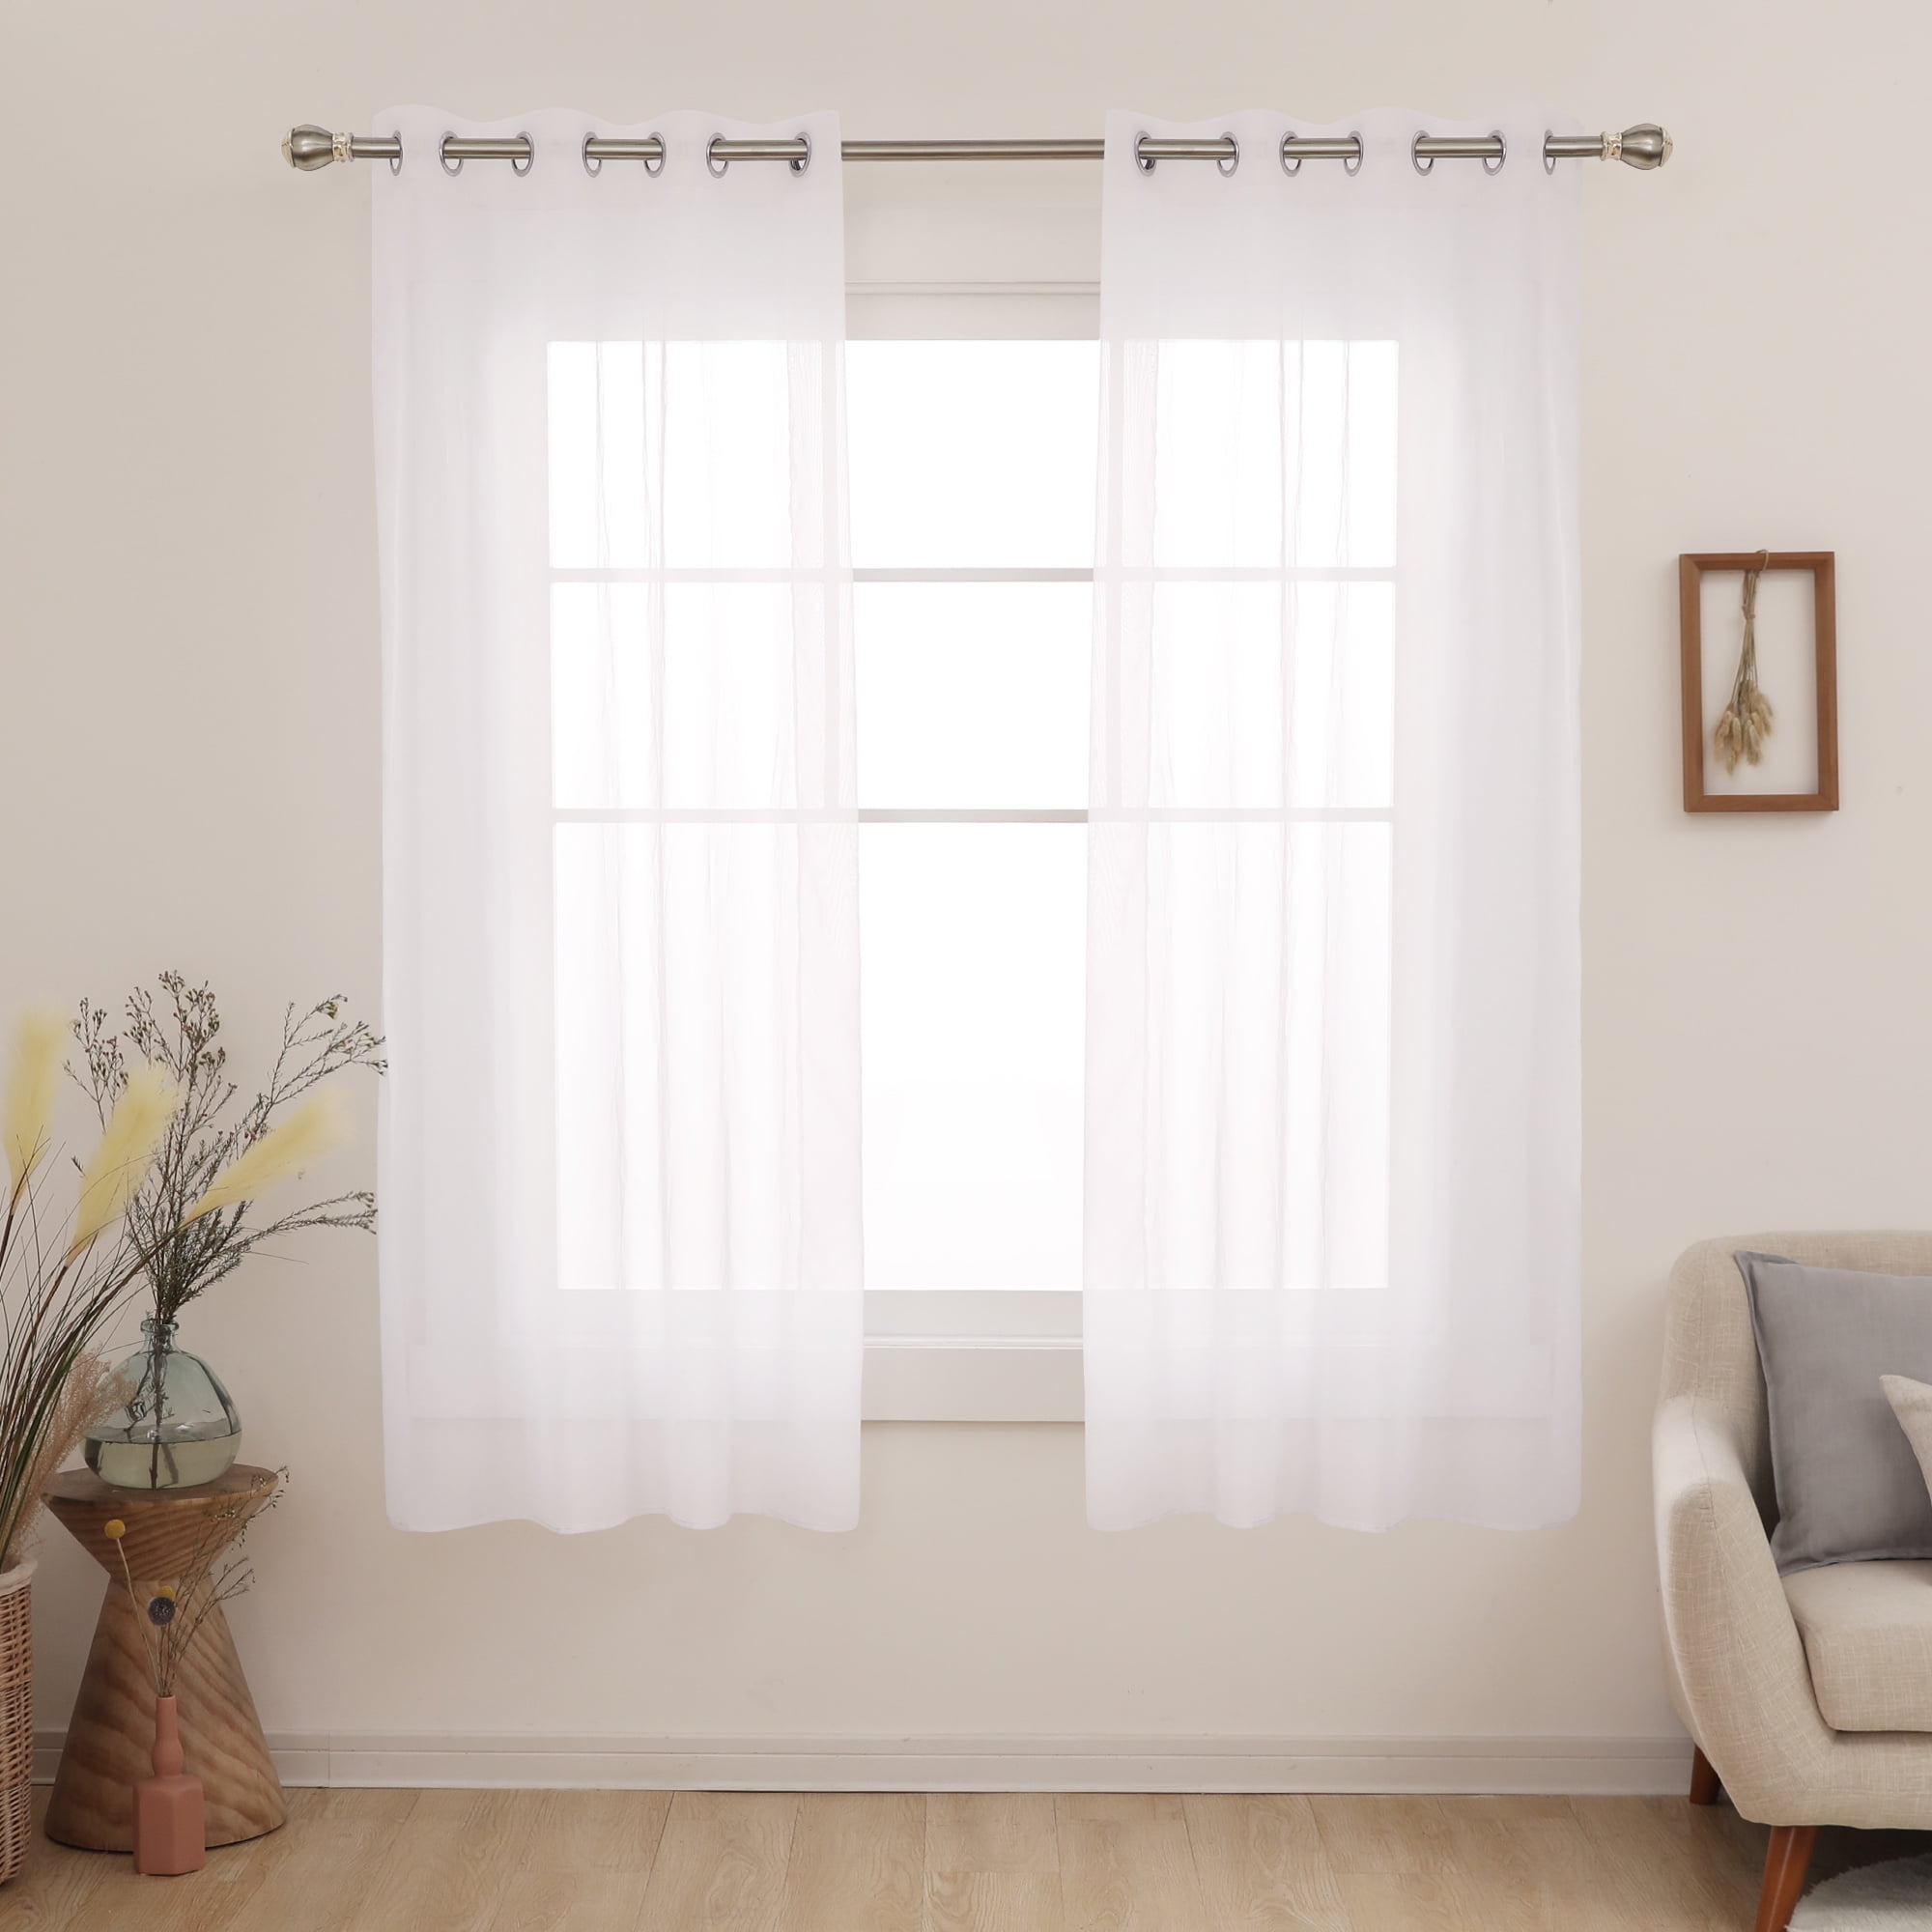 Deconovo White Sheer Curtains 54 Inch Length-Rod Pocket Voile Drape Curtains for 